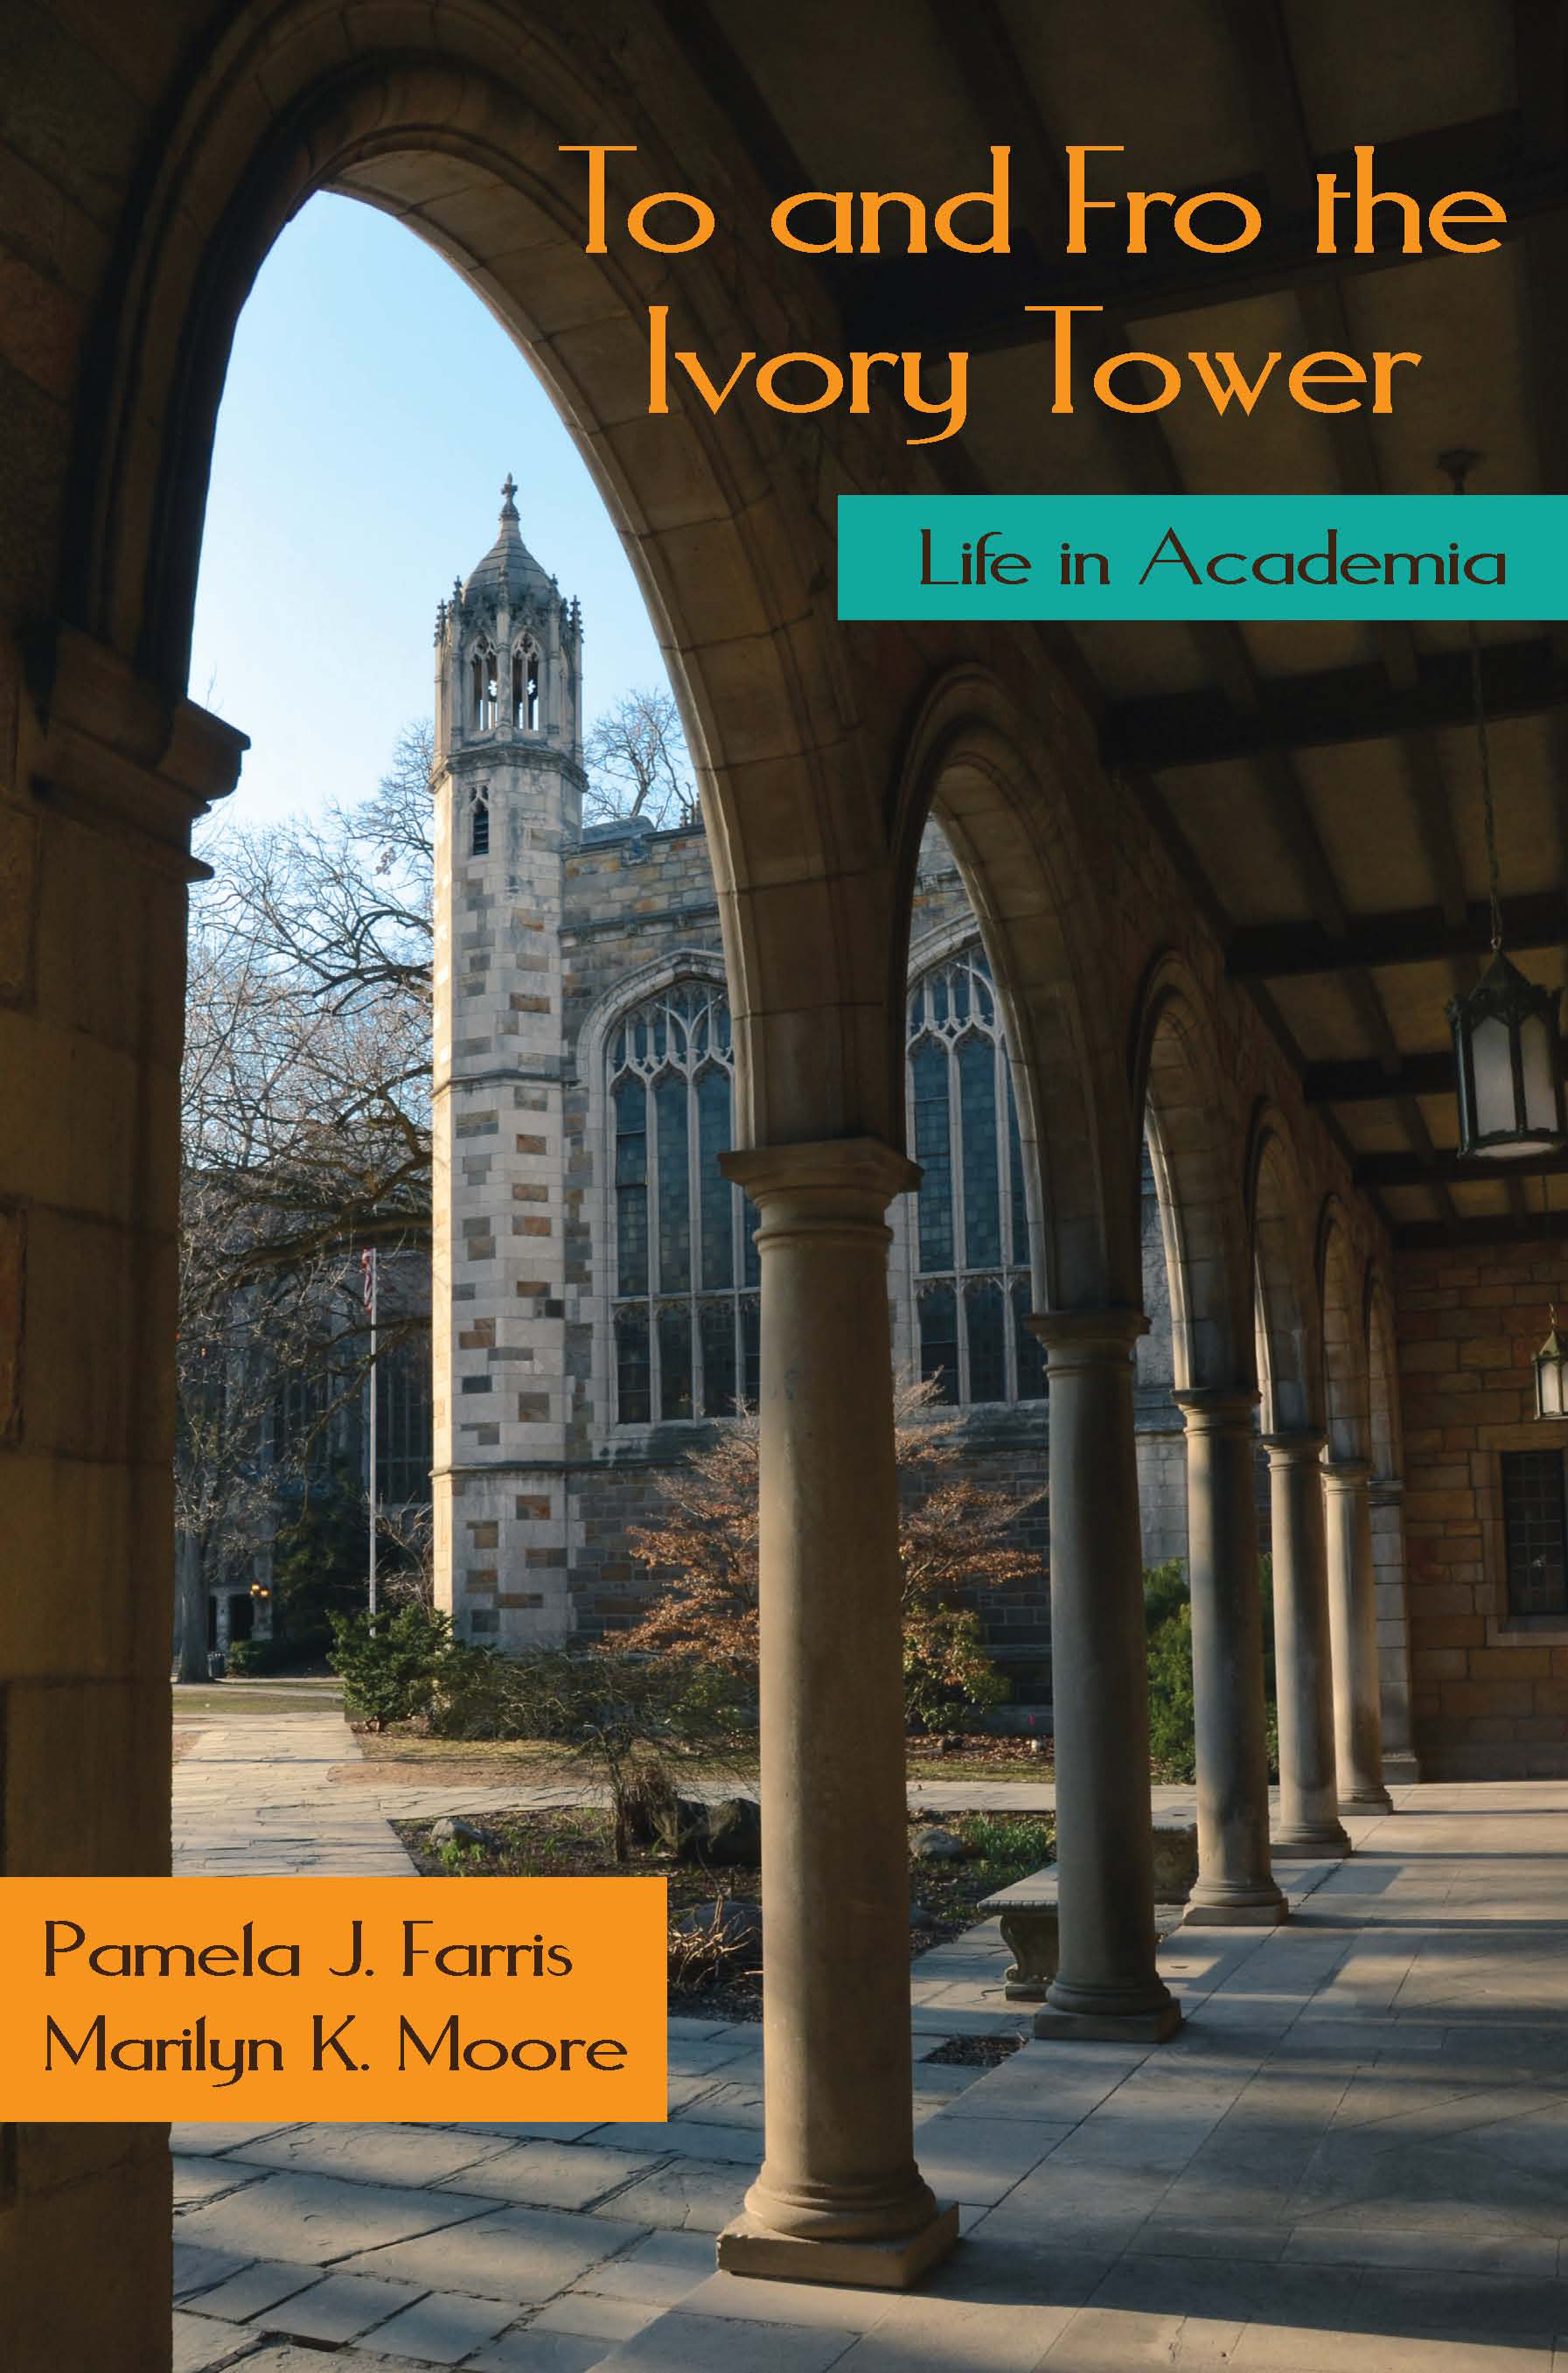 To and Fro the Ivory Tower: Life in Academia by Pamela J. Farris, Marilyn K. Moore